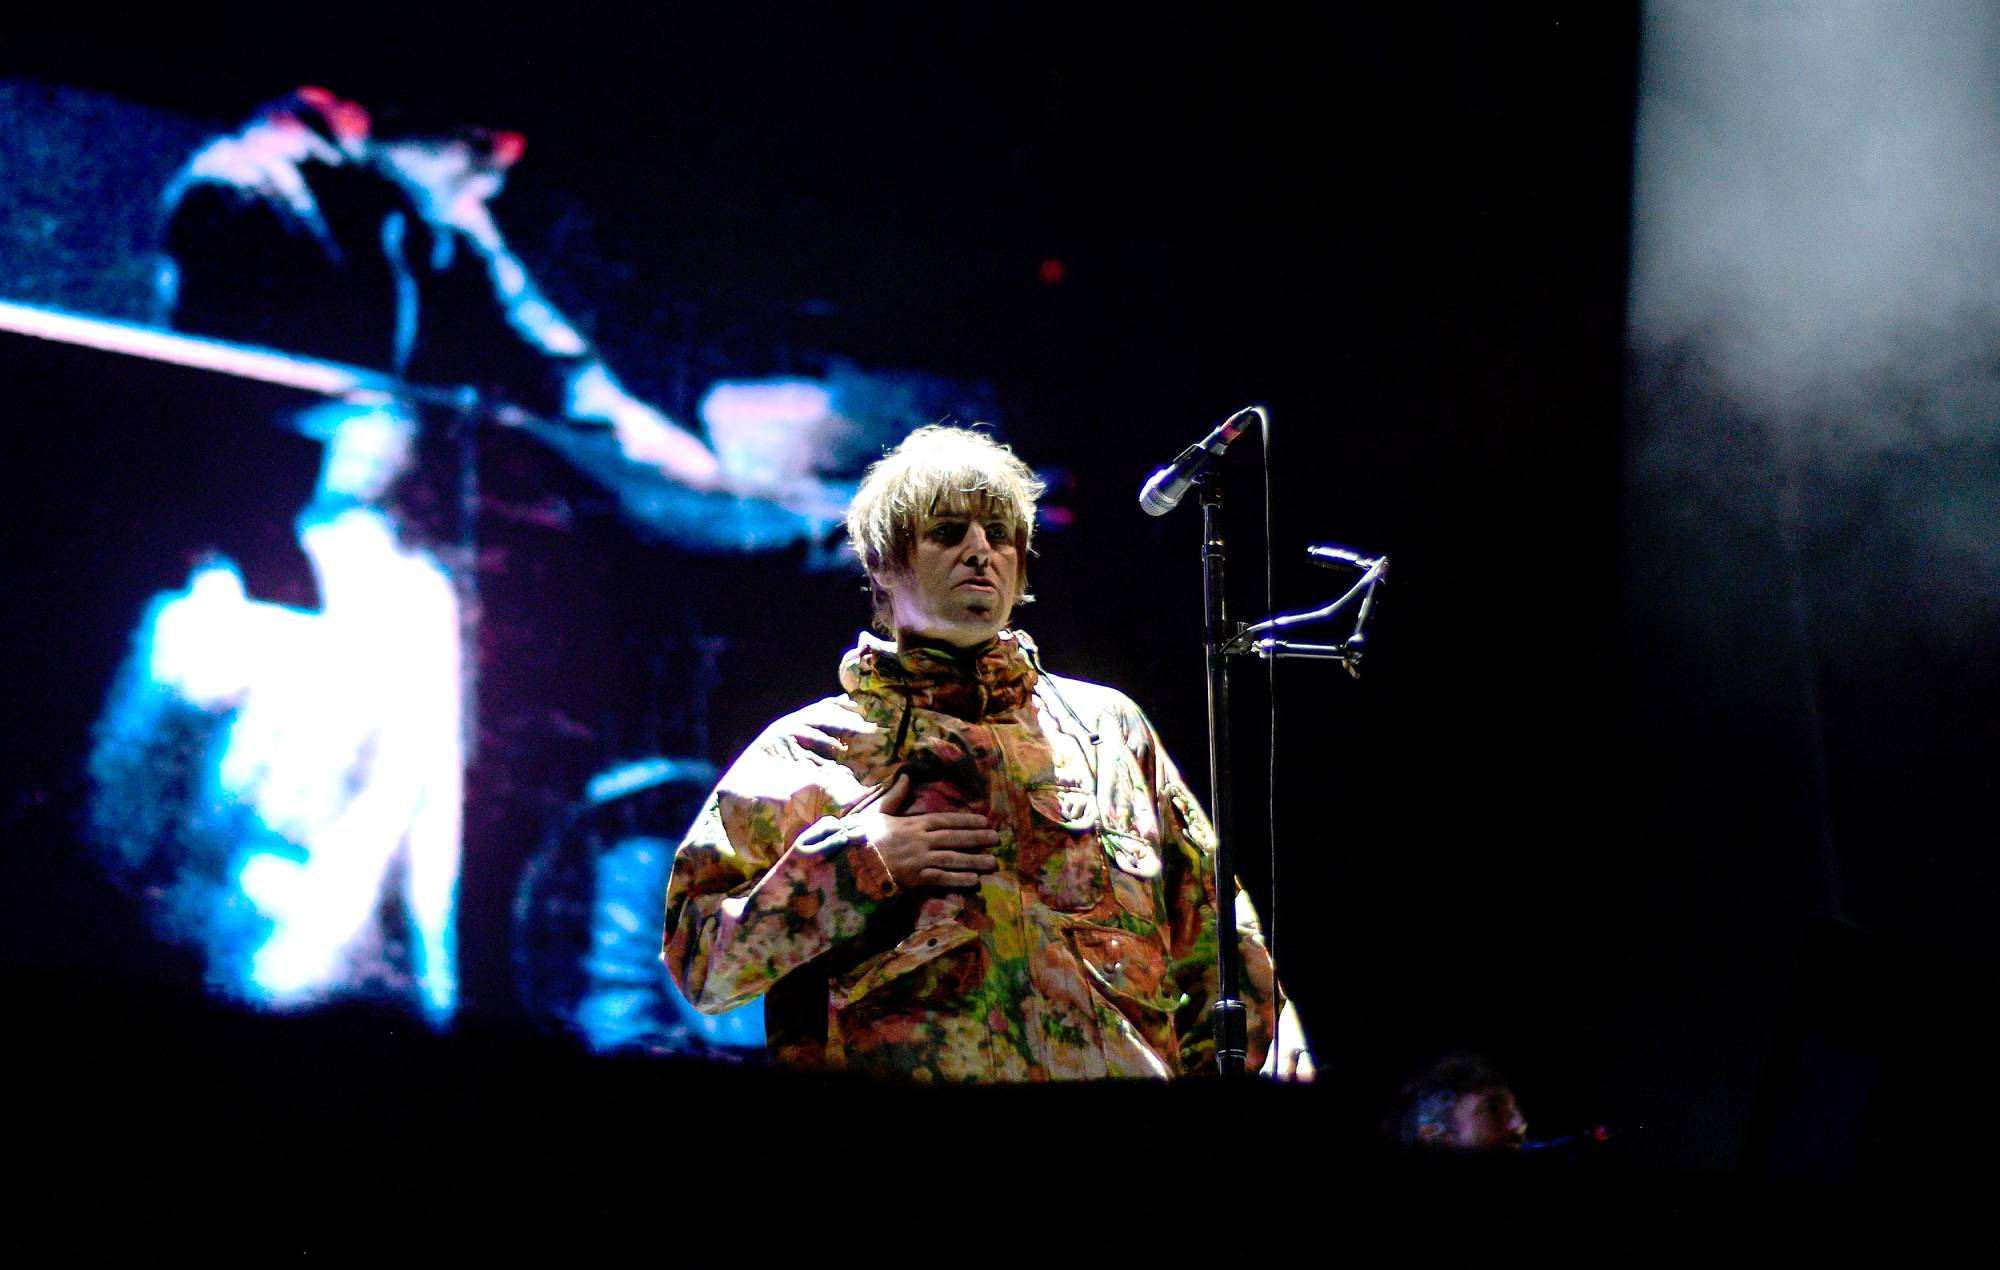 Singer Liam Gallagher performs on stage during day 2 of 'Corona Capital 2022' at Autodromo Hermanos Rodriguez on November 19, 2022 in Mexico City, Mexico. (Photo by Jaime Nogales/Medios y Media/Getty Images)